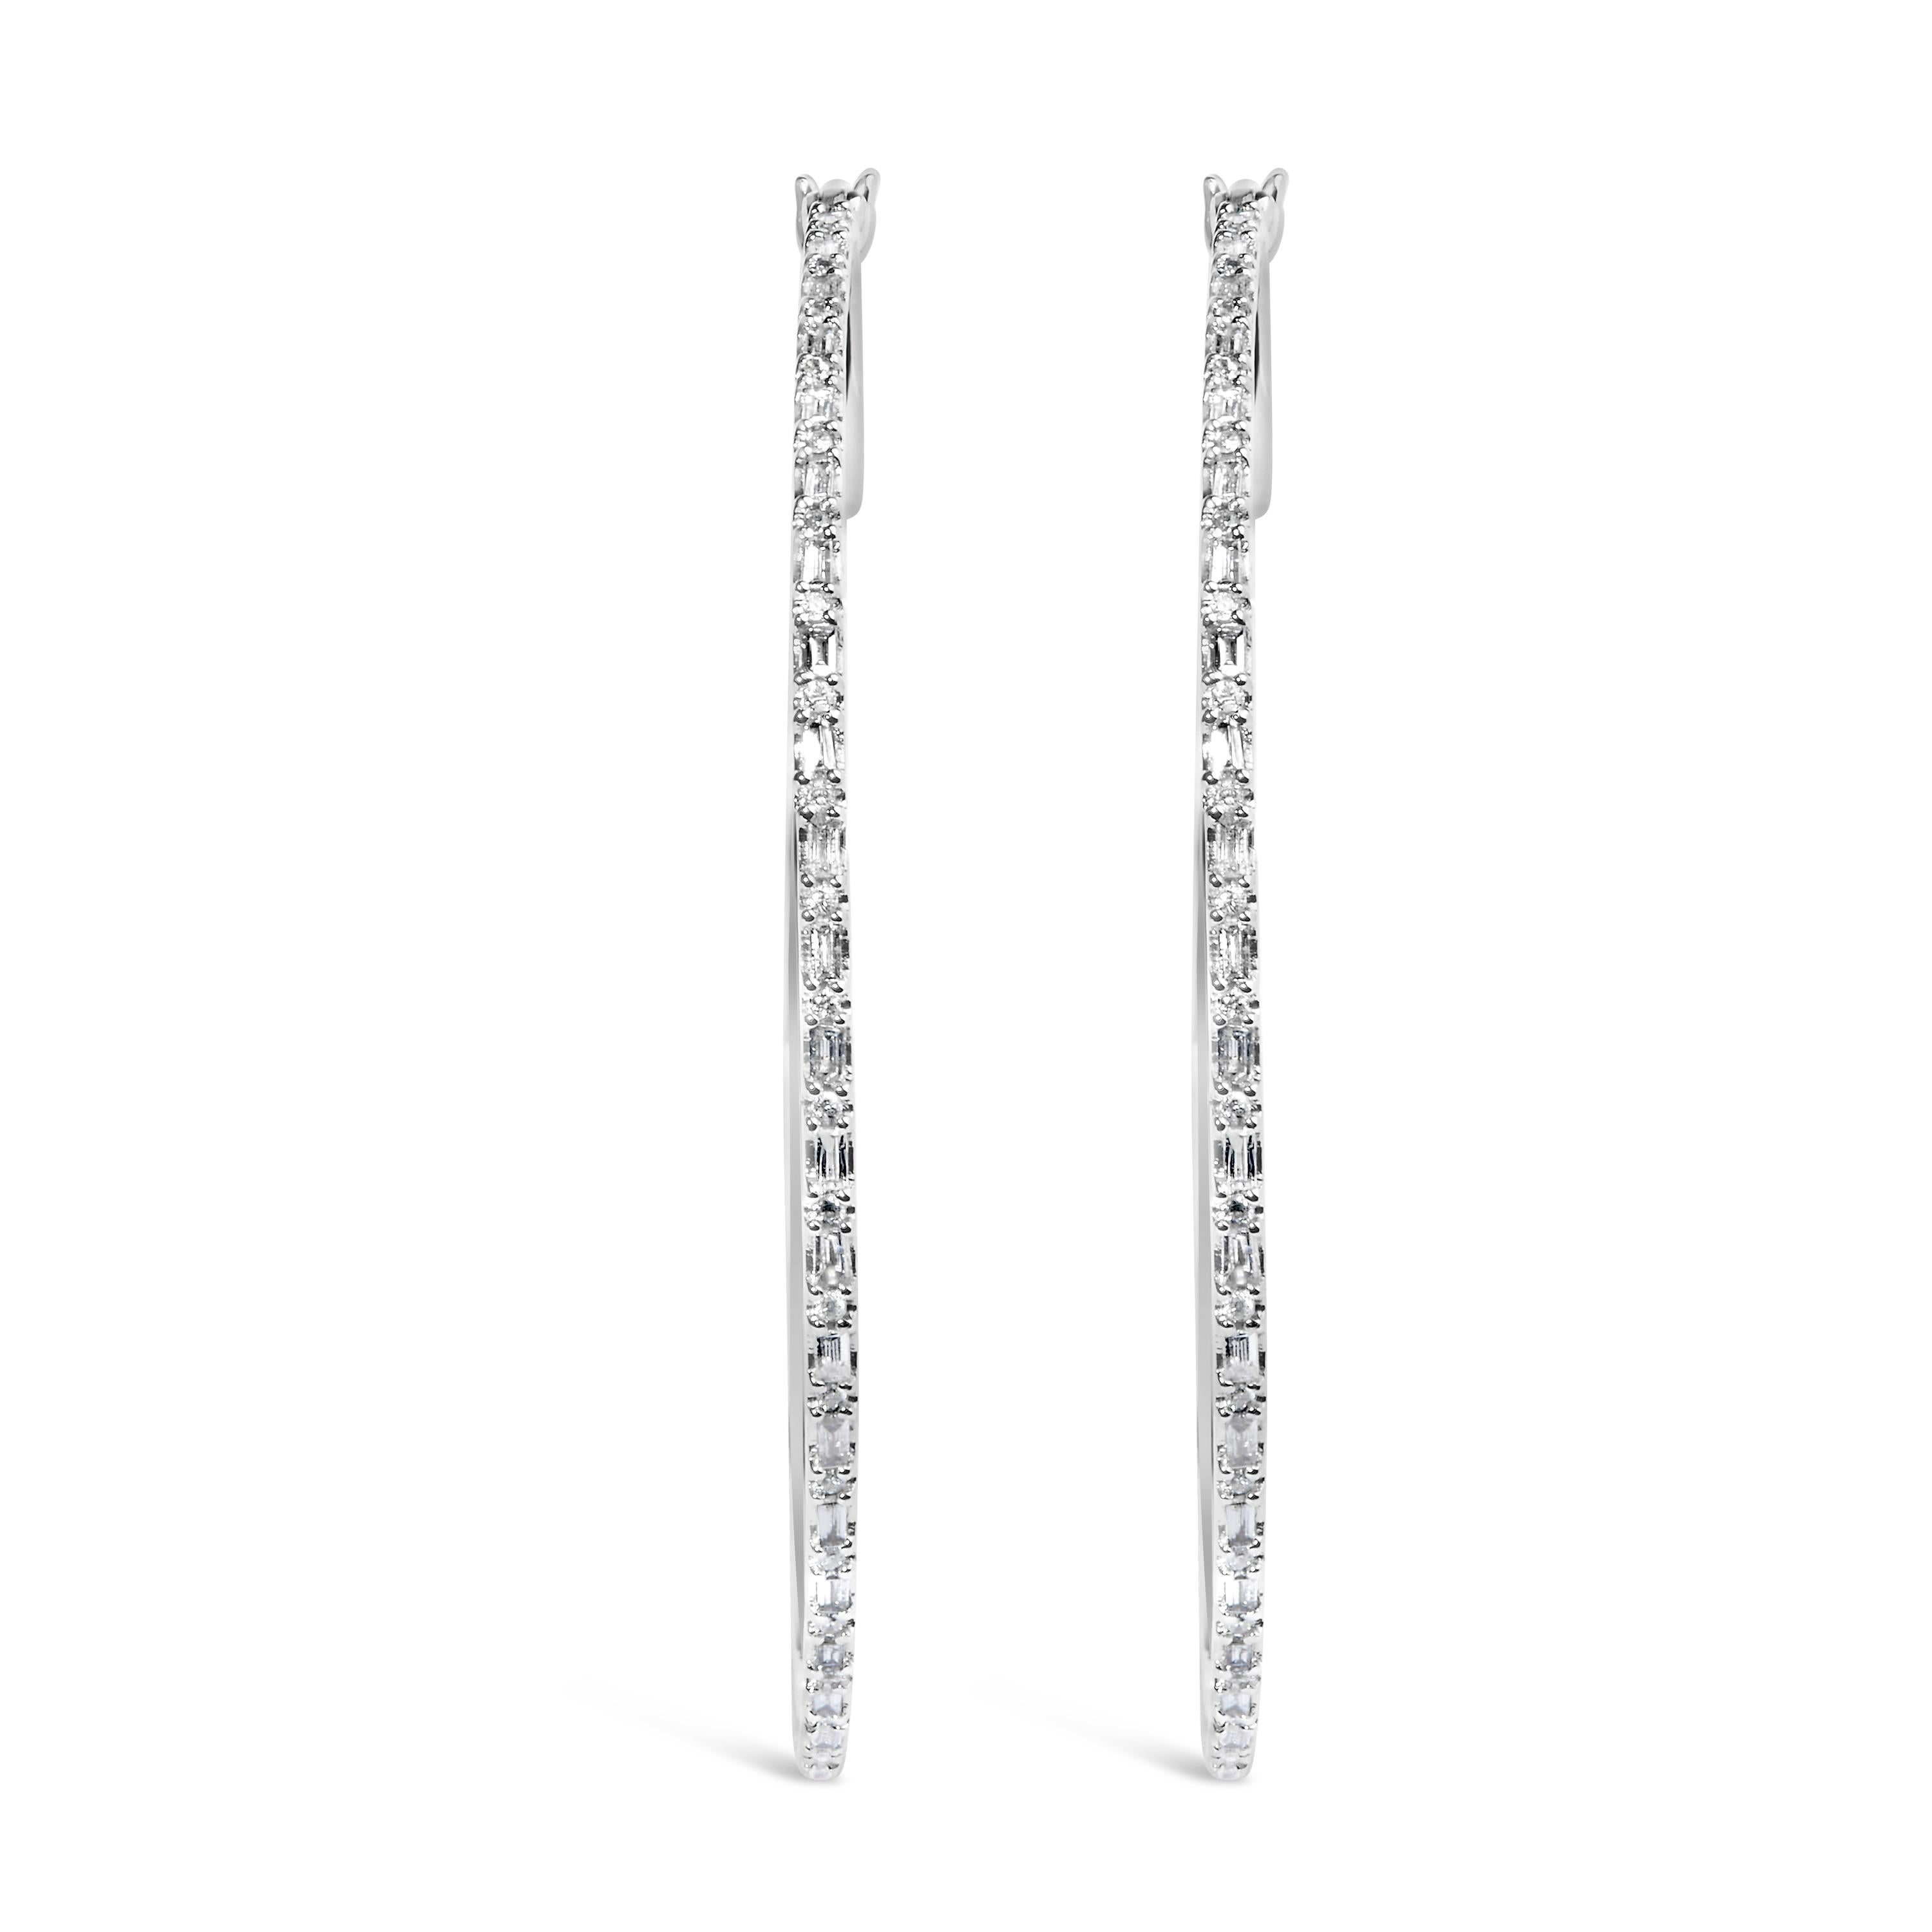 Indulge in timeless elegance with our Baguette and Round Alternating Diamond Hoop Earrings, crafted from lustrous 10K white gold. Adorned with 100 natural diamonds totaling 1/2 cttw, including 50 round and 50 baguette-cut stones, they sparkle with